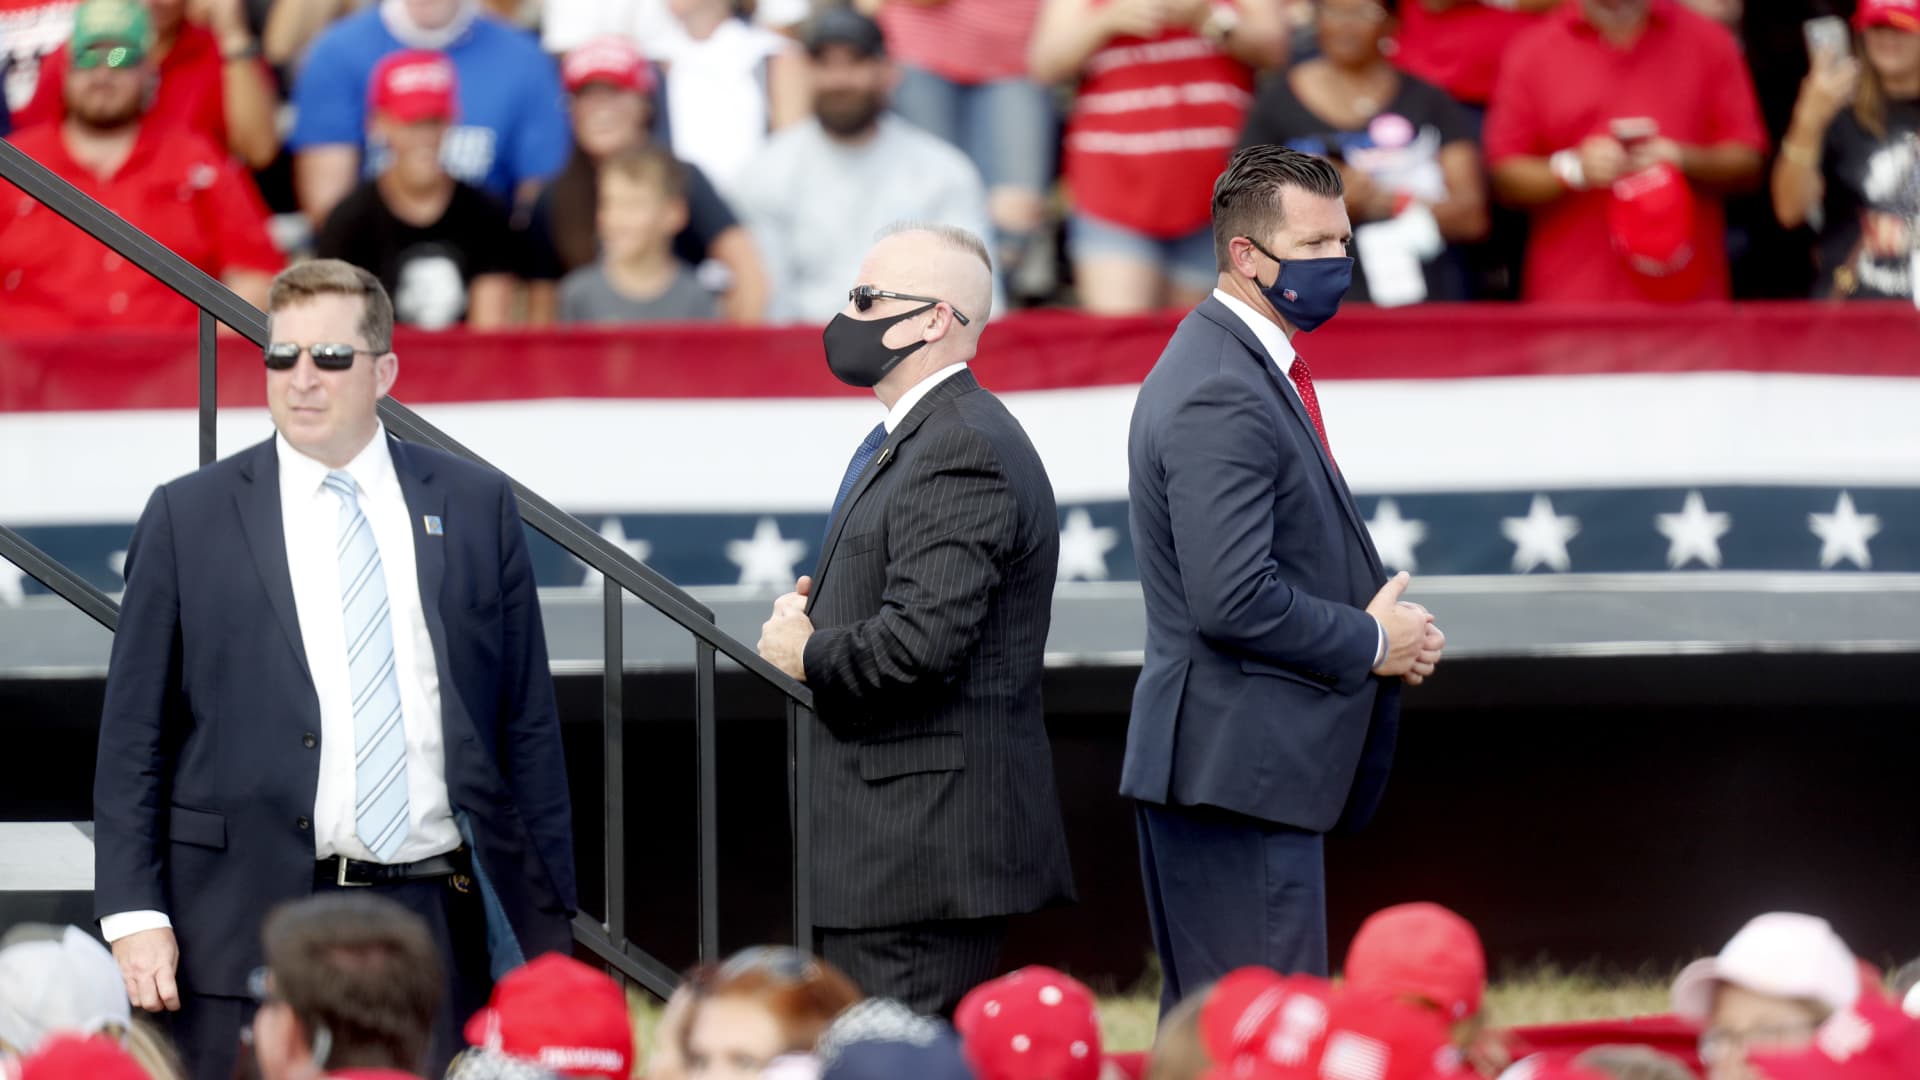 U.S. Secret Service is seen during President Donald Trump campaign speech just four days before Election Day outside of Raymond James Stadium on October 29, 2020 in Tampa, Florida.